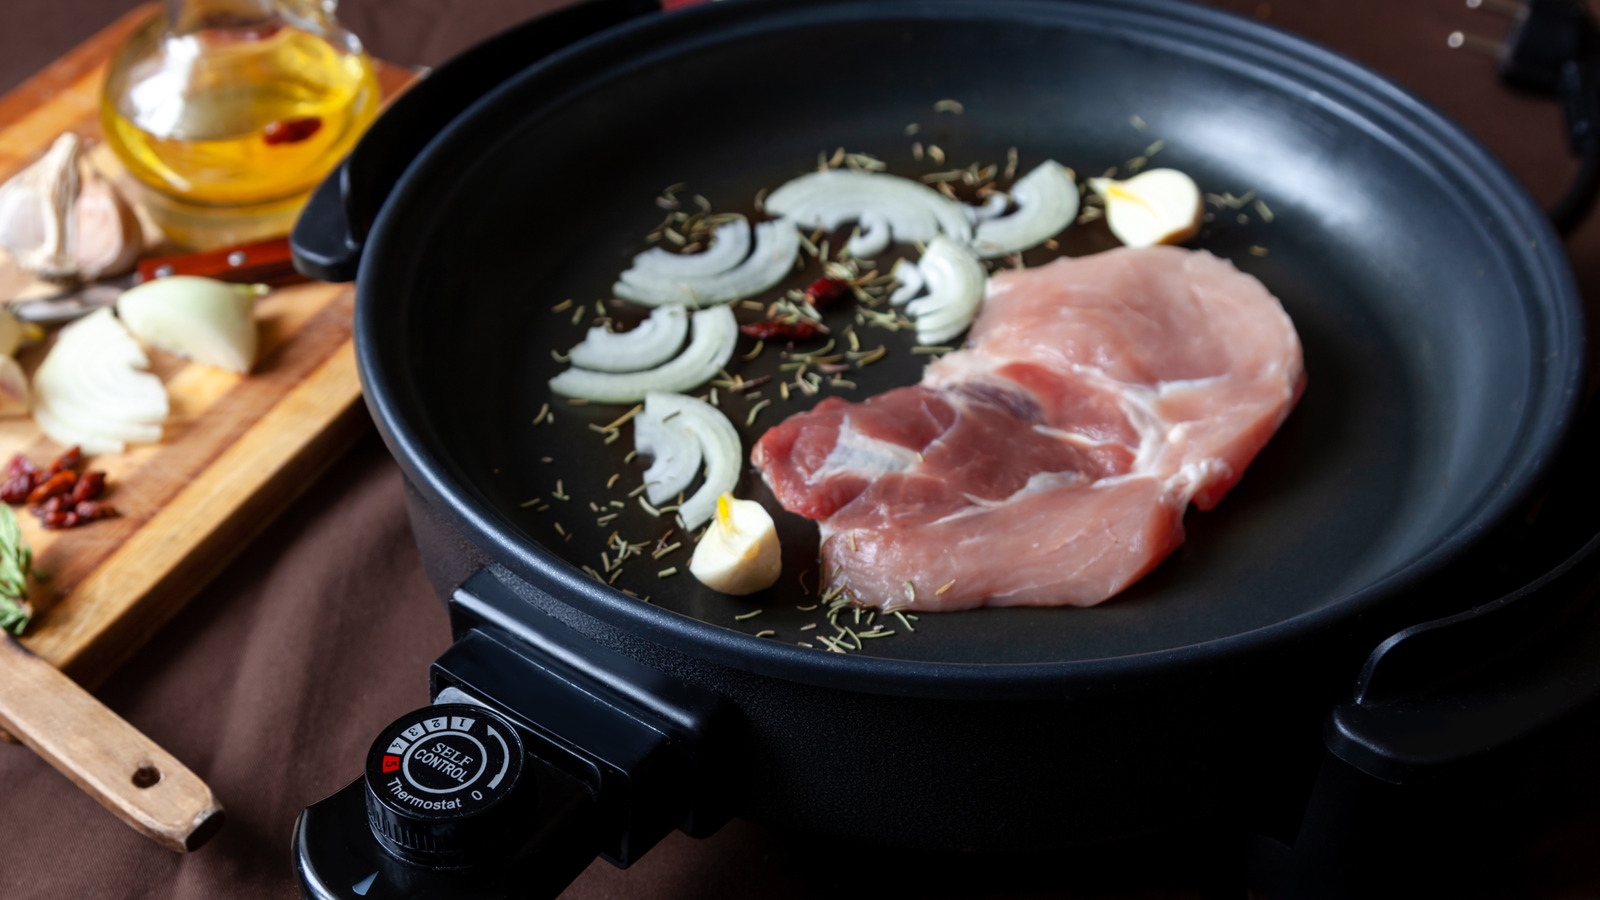 Electric Skillet - Upgrade Your Kitchen with 